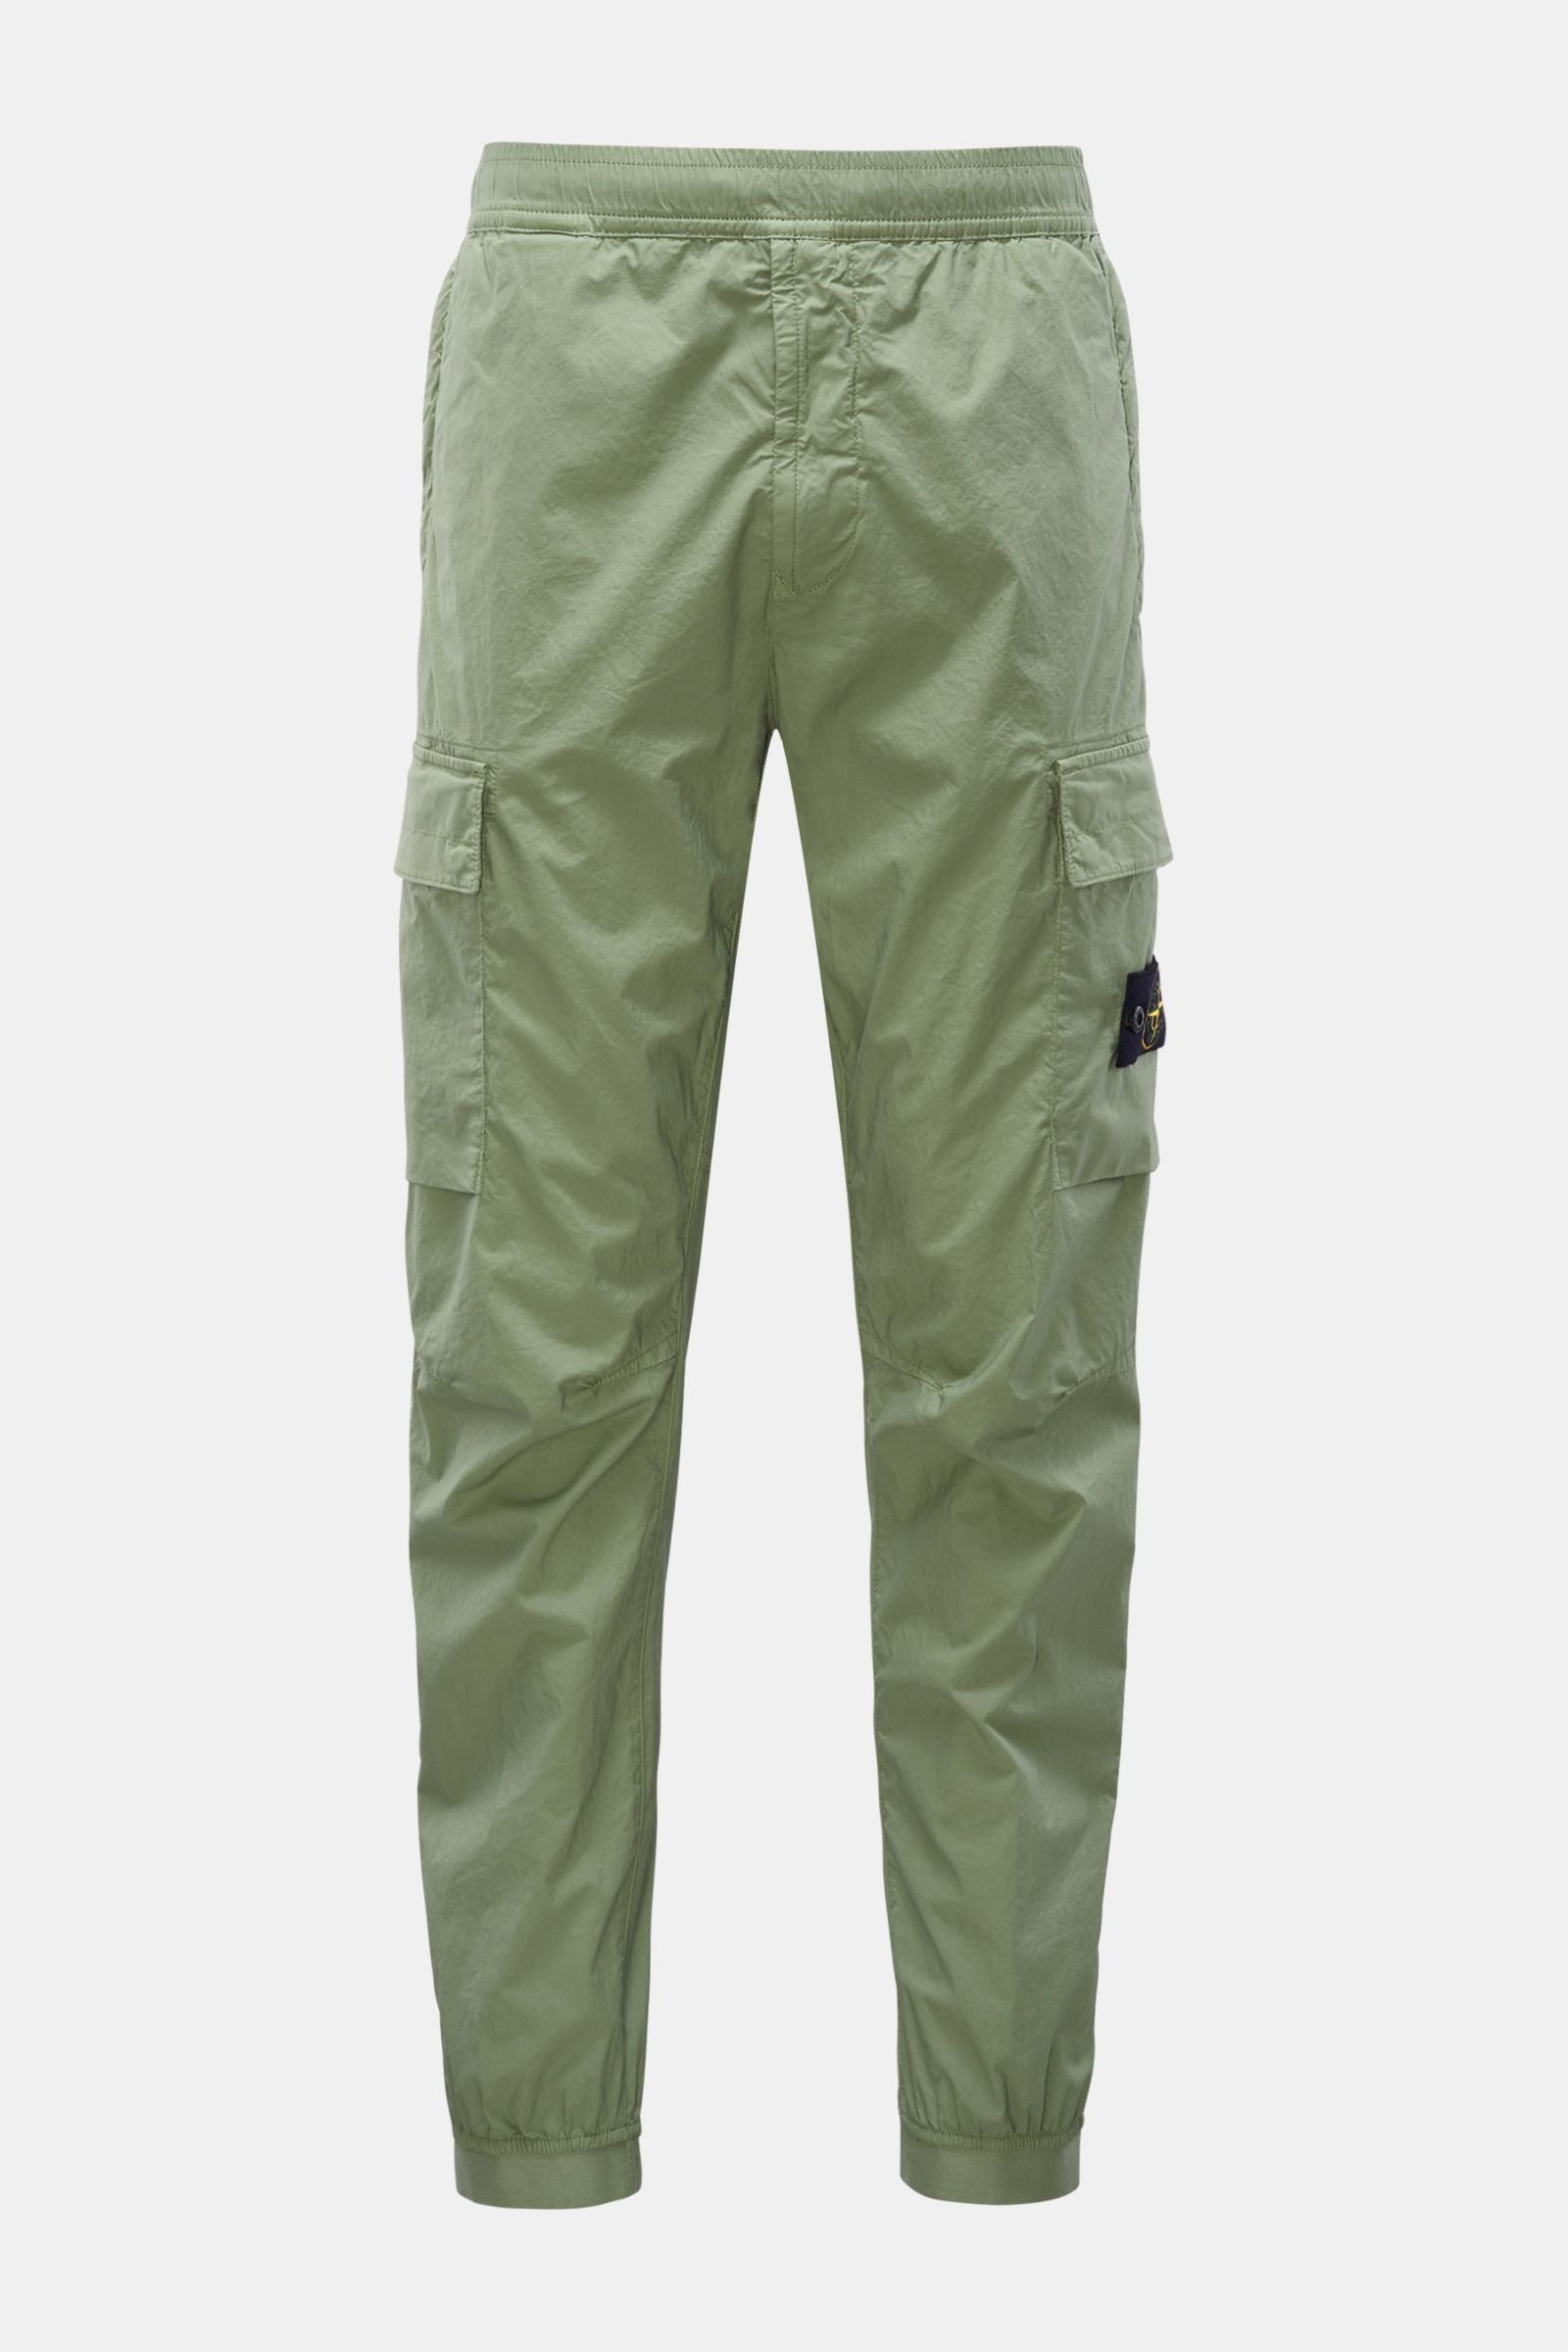 Cargo jogger pants olive